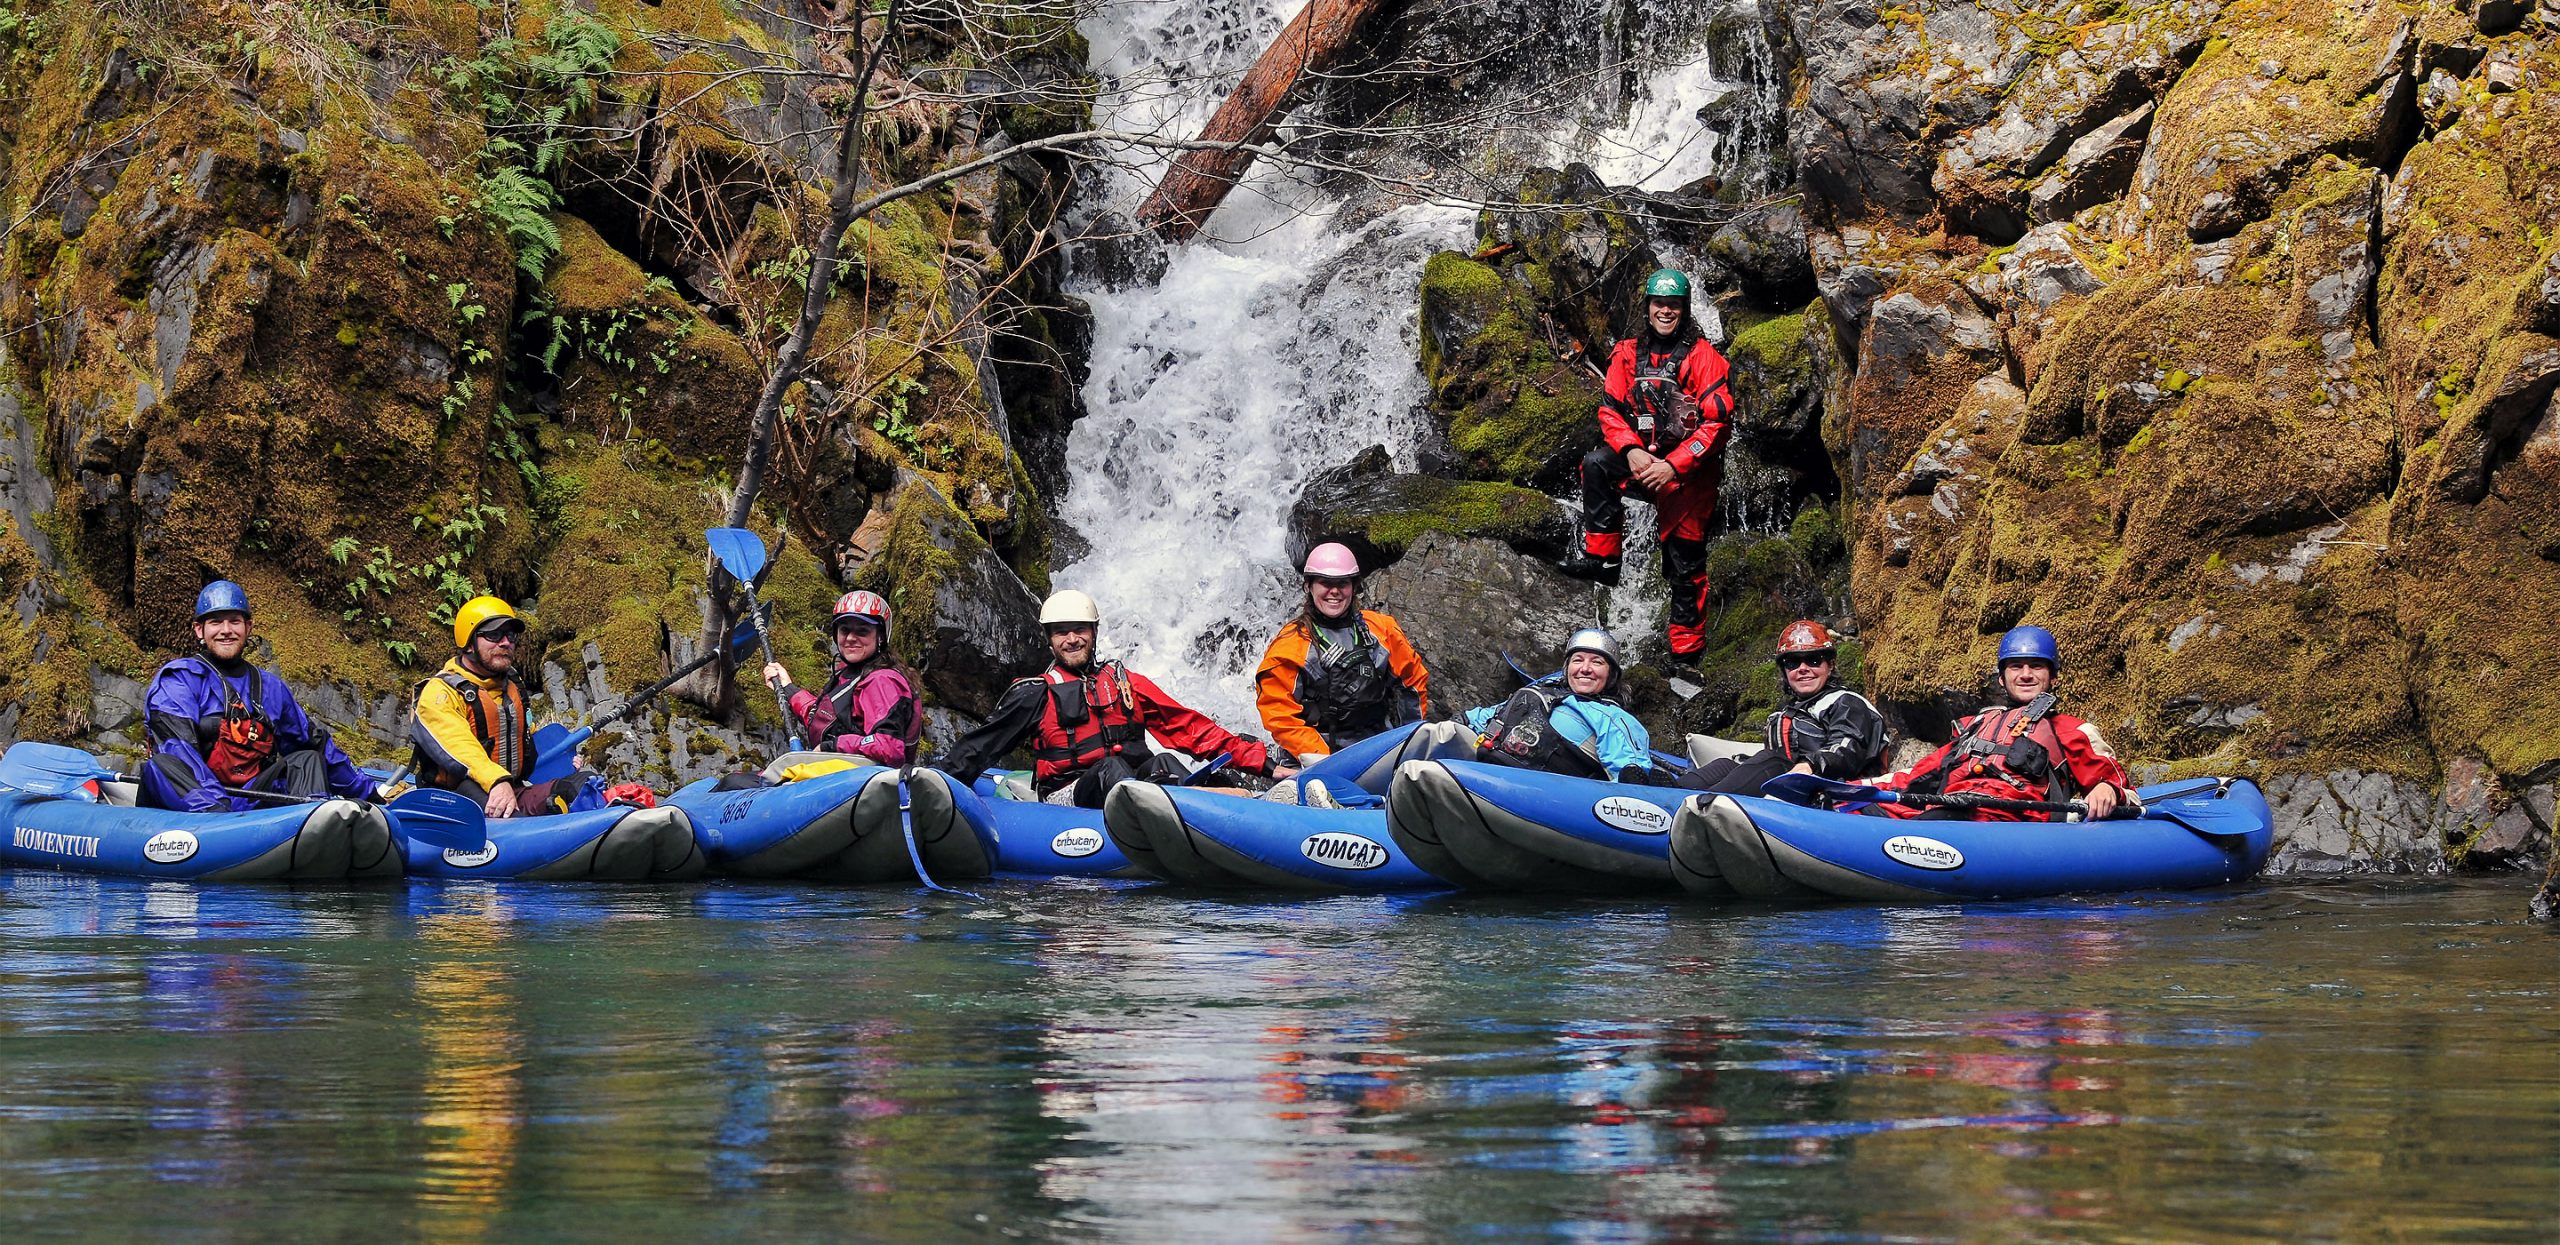 50 Years of the Wild & Scenic Rogue River — Rogue Riverkeeper